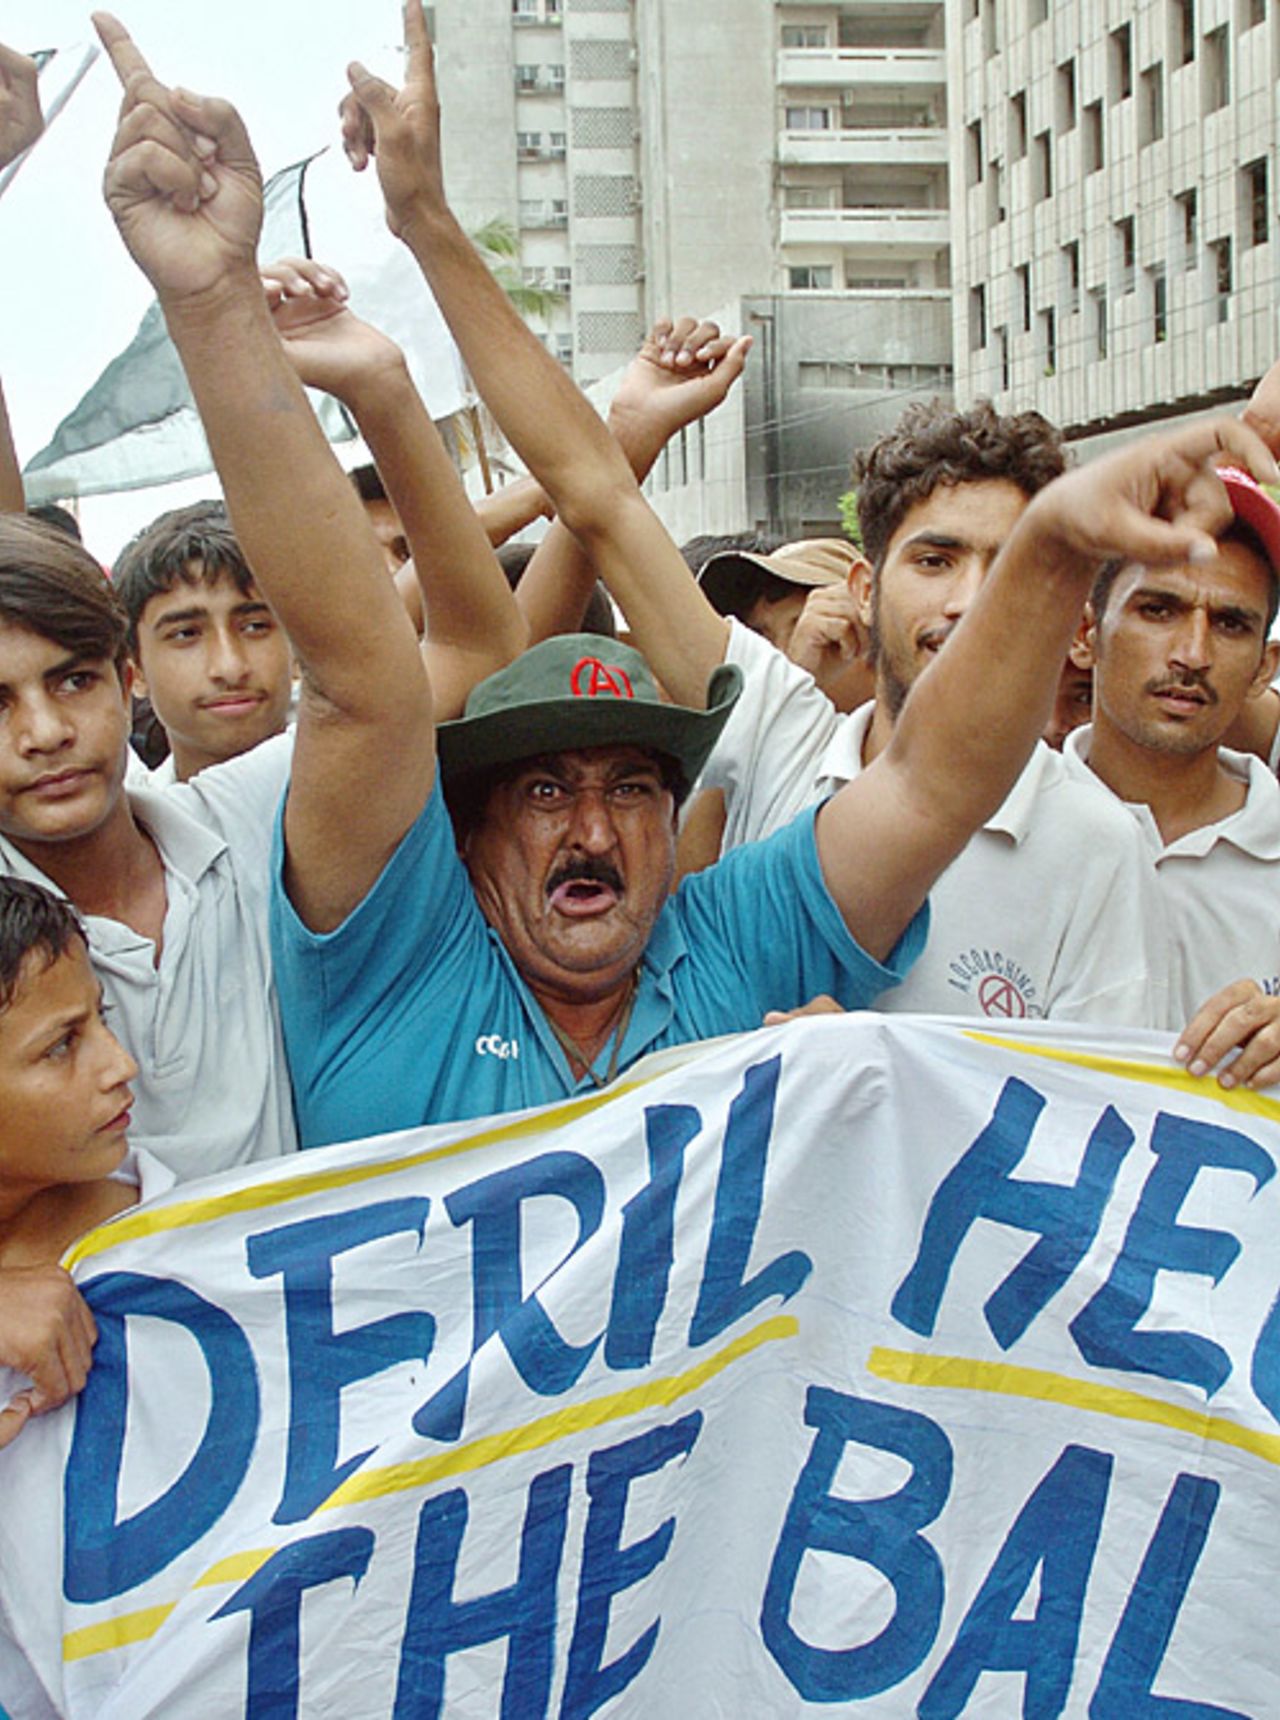 Pakistani protestors demonstrate their anger with Darrell Hair during a rally, Karachi, August 22, 2006